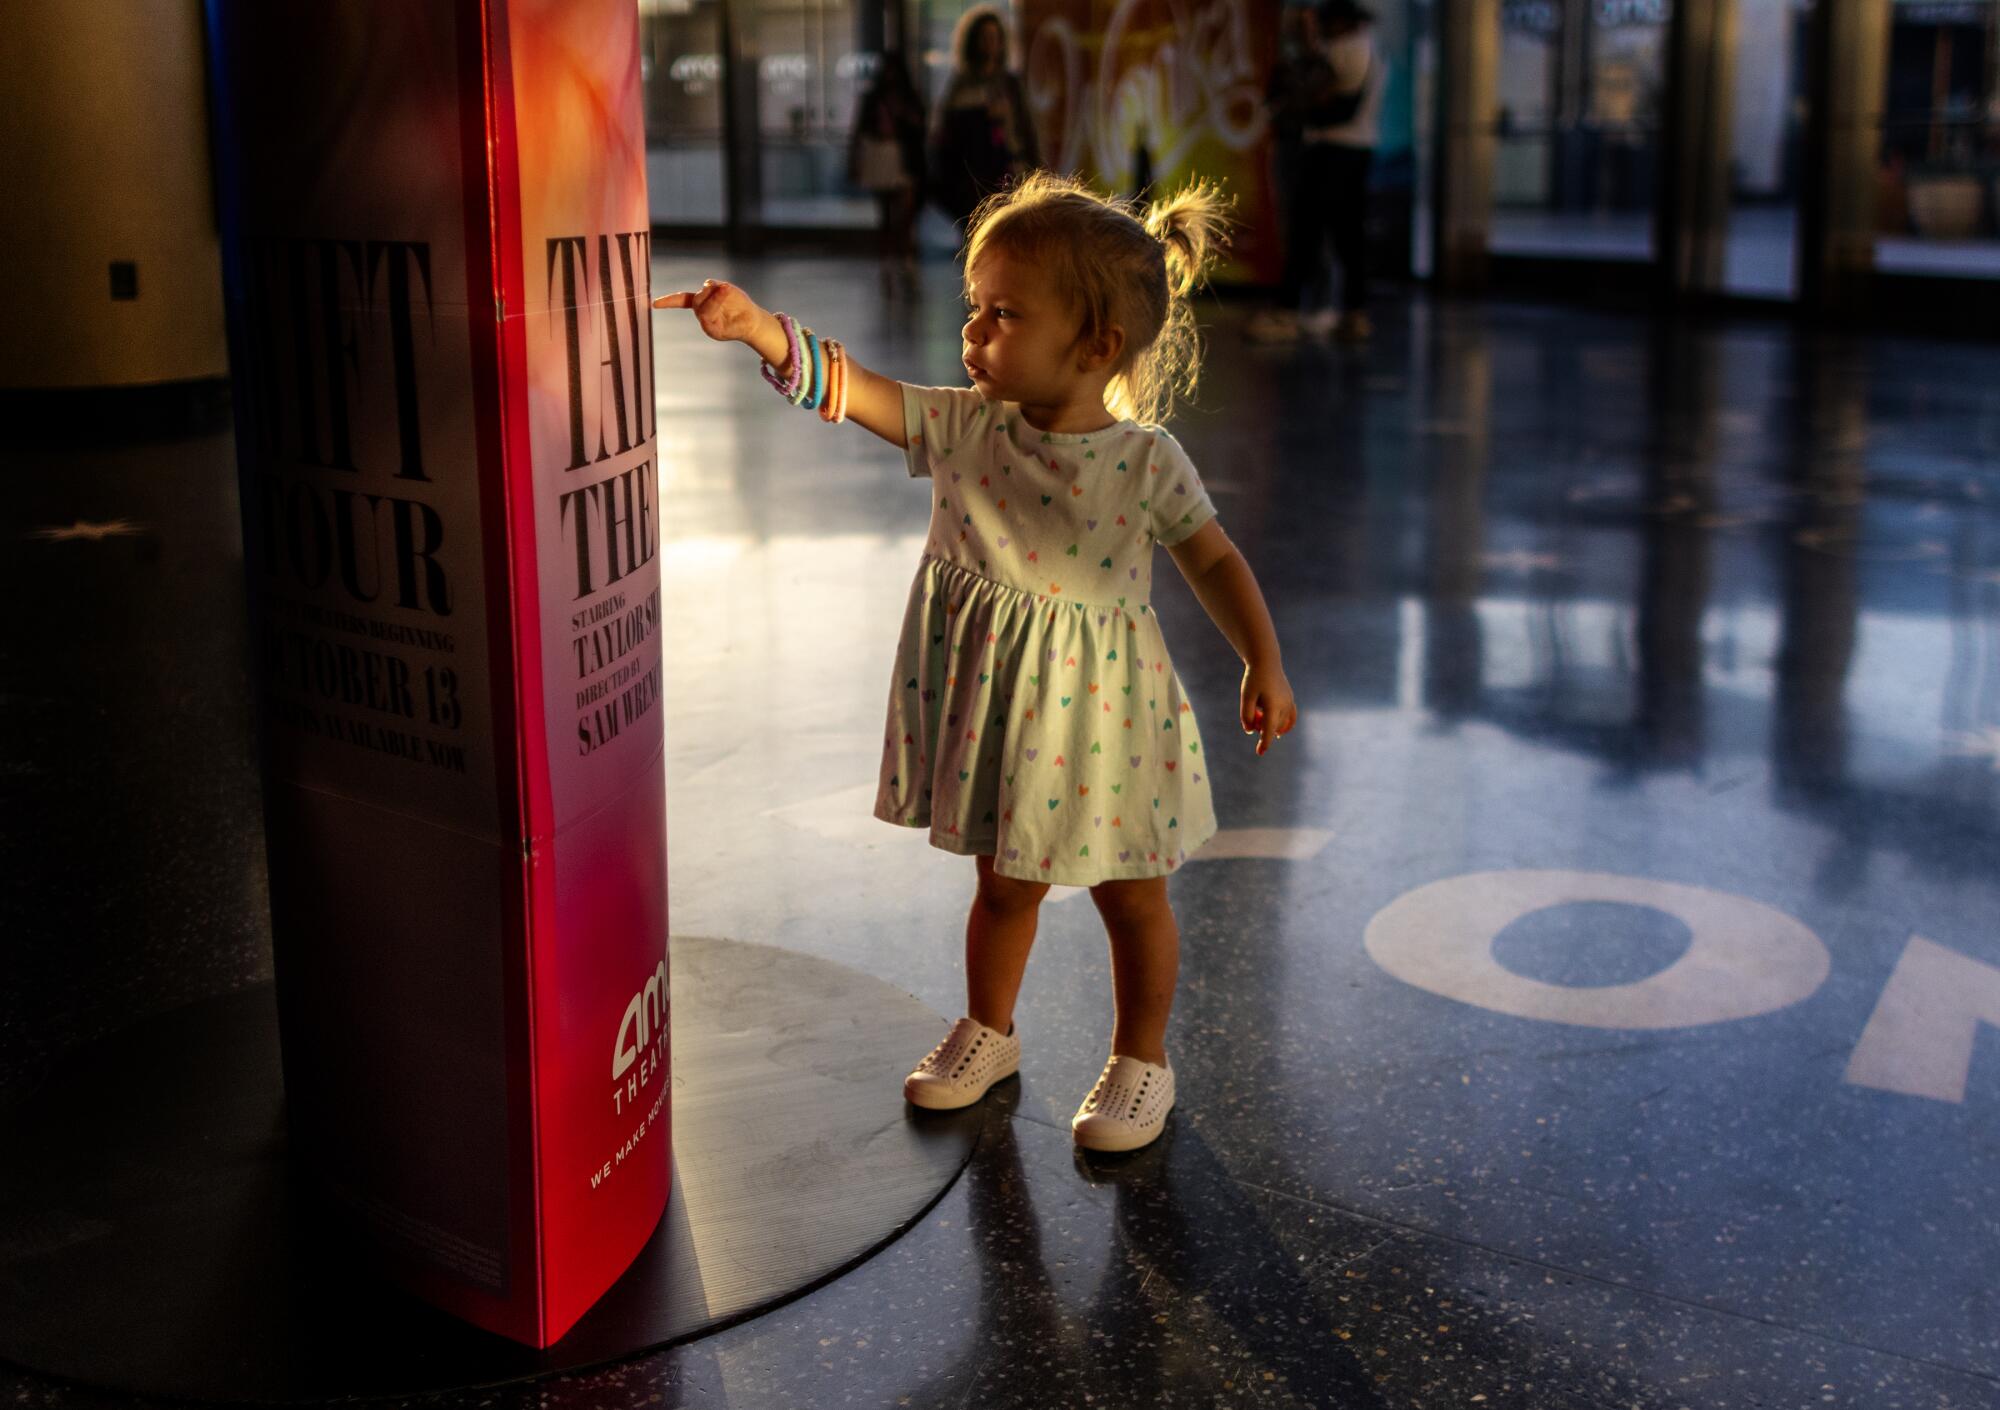 Zealand Birnbaum, 1, of West Hollywood points to a Taylor Swift poster